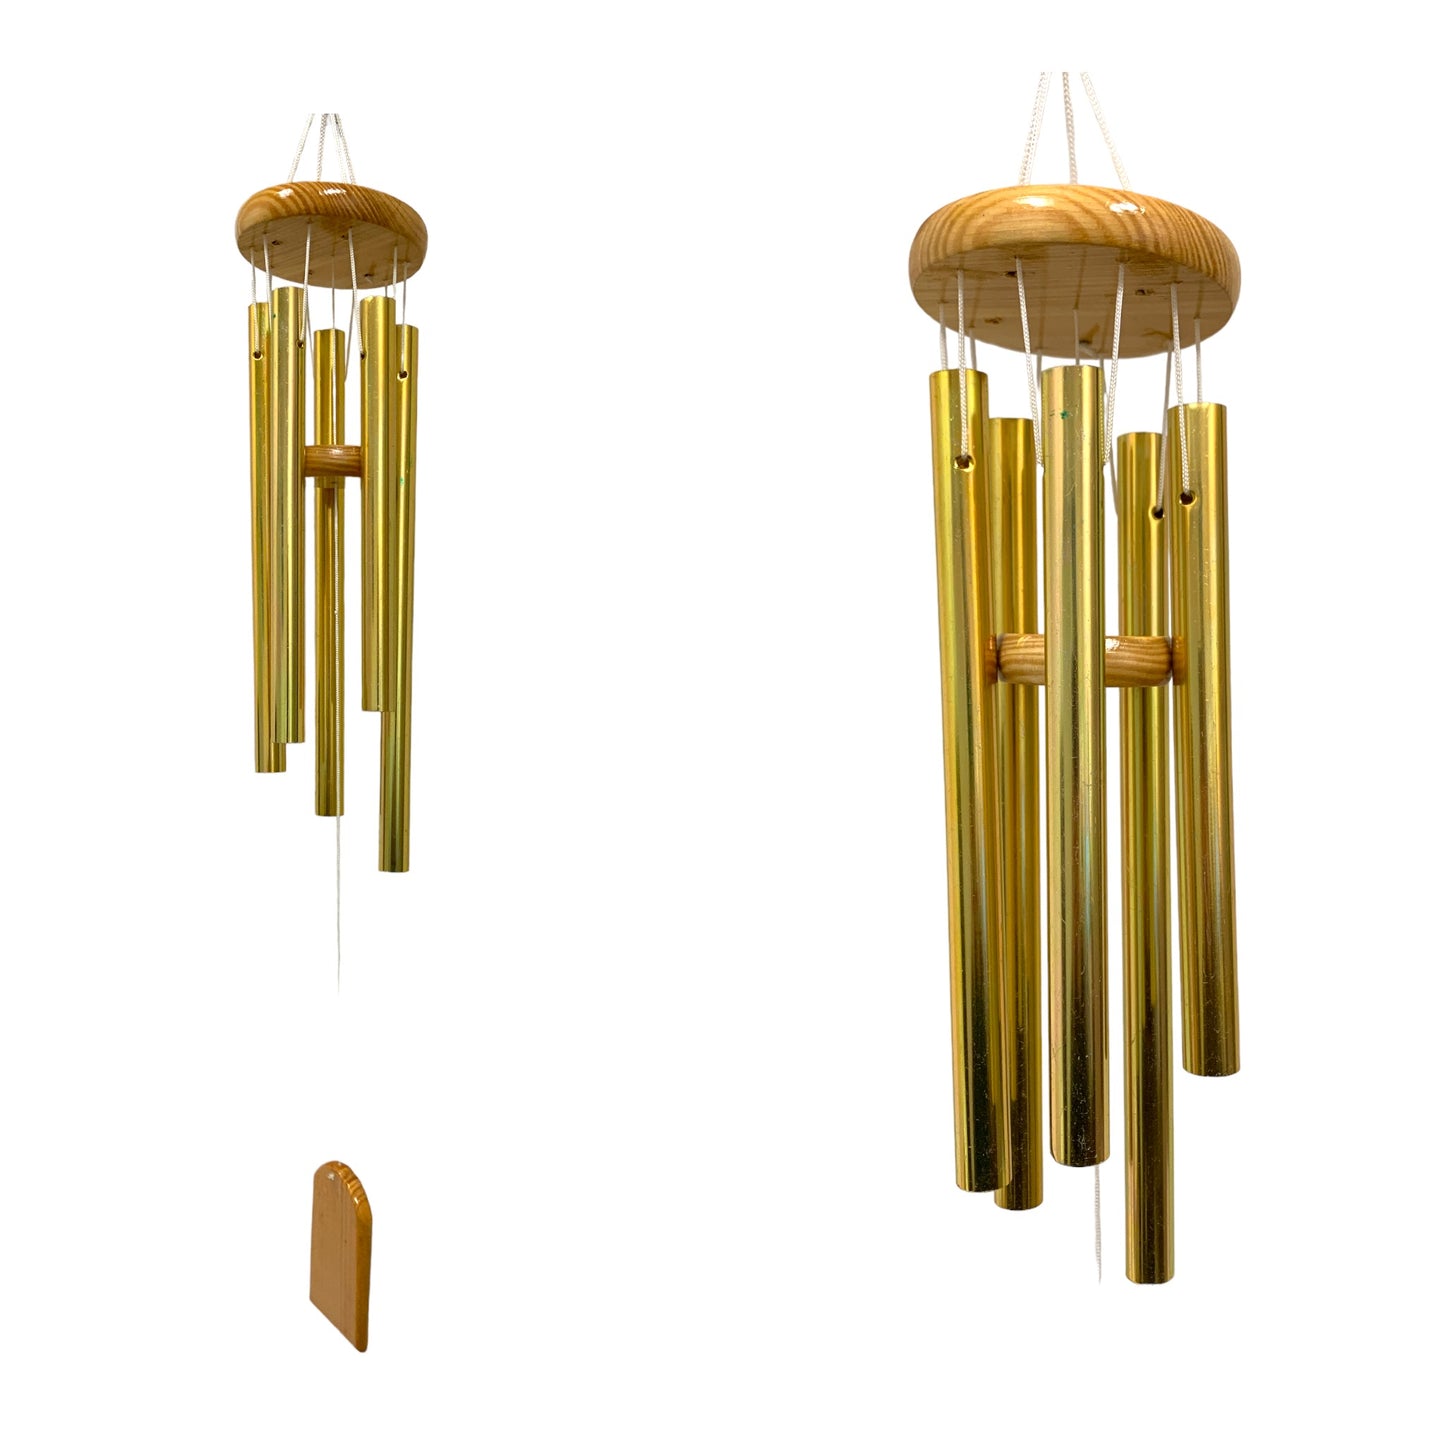 GOLD METAL AND WOOD - 20 INCH - LARGE WIND CHIME